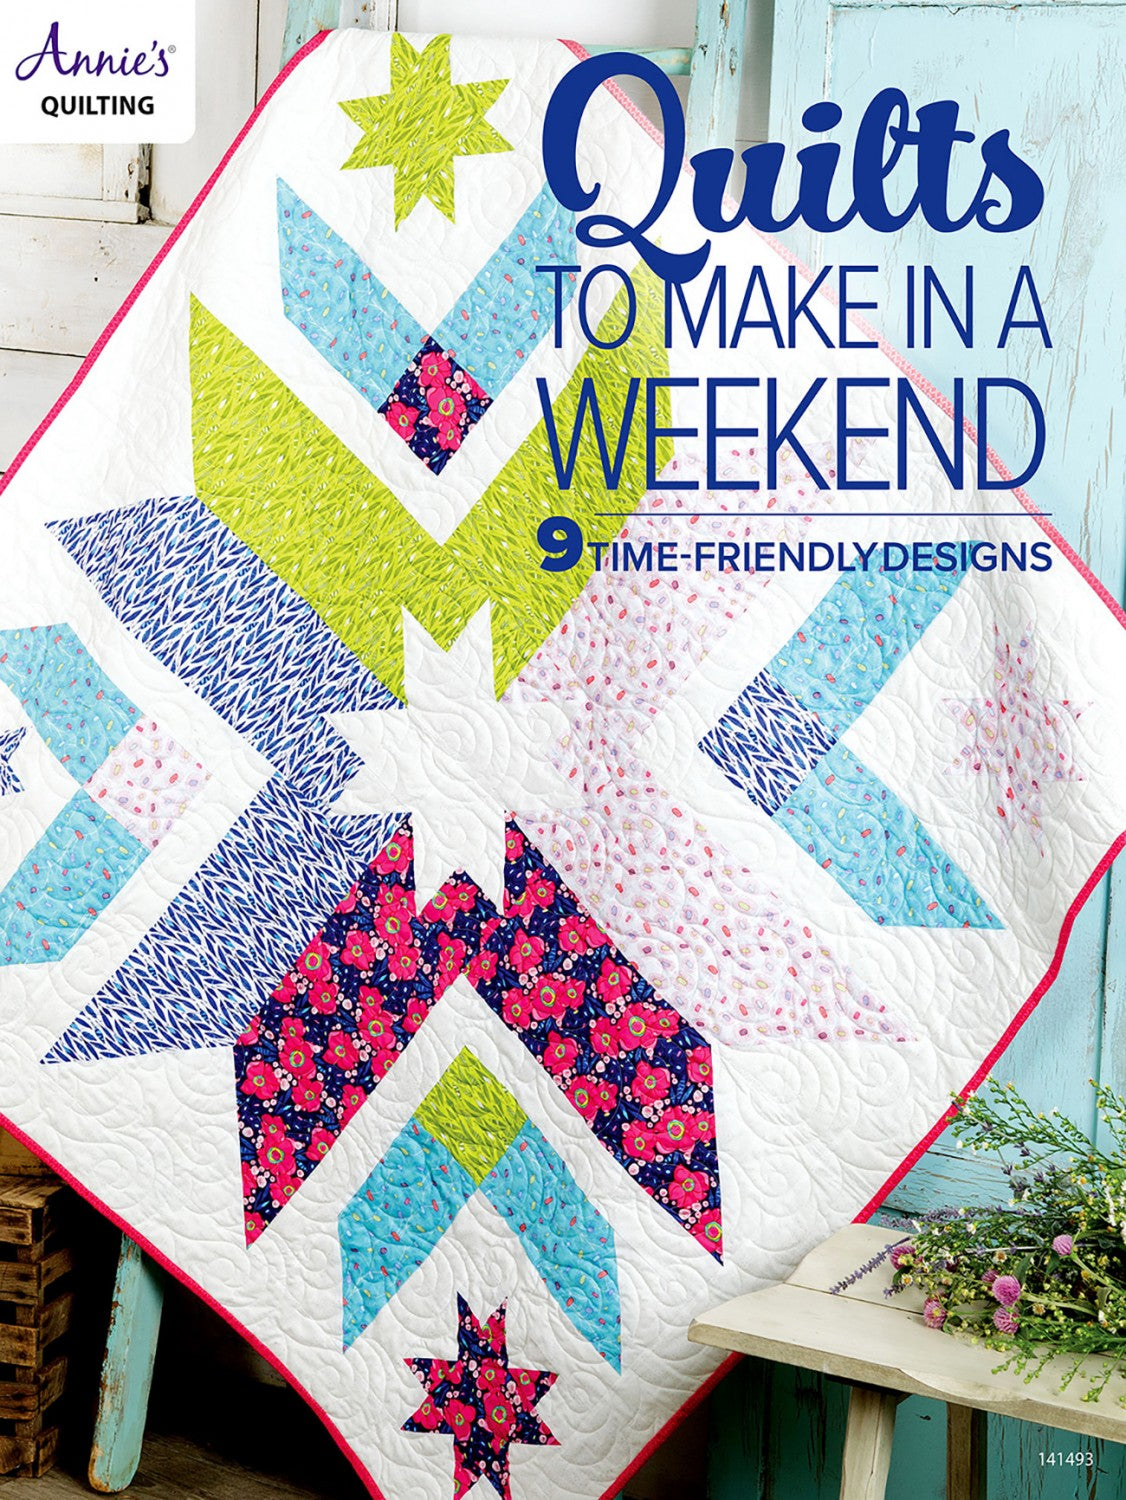 Quilts to Make in a Weekend - Annie's Quilting